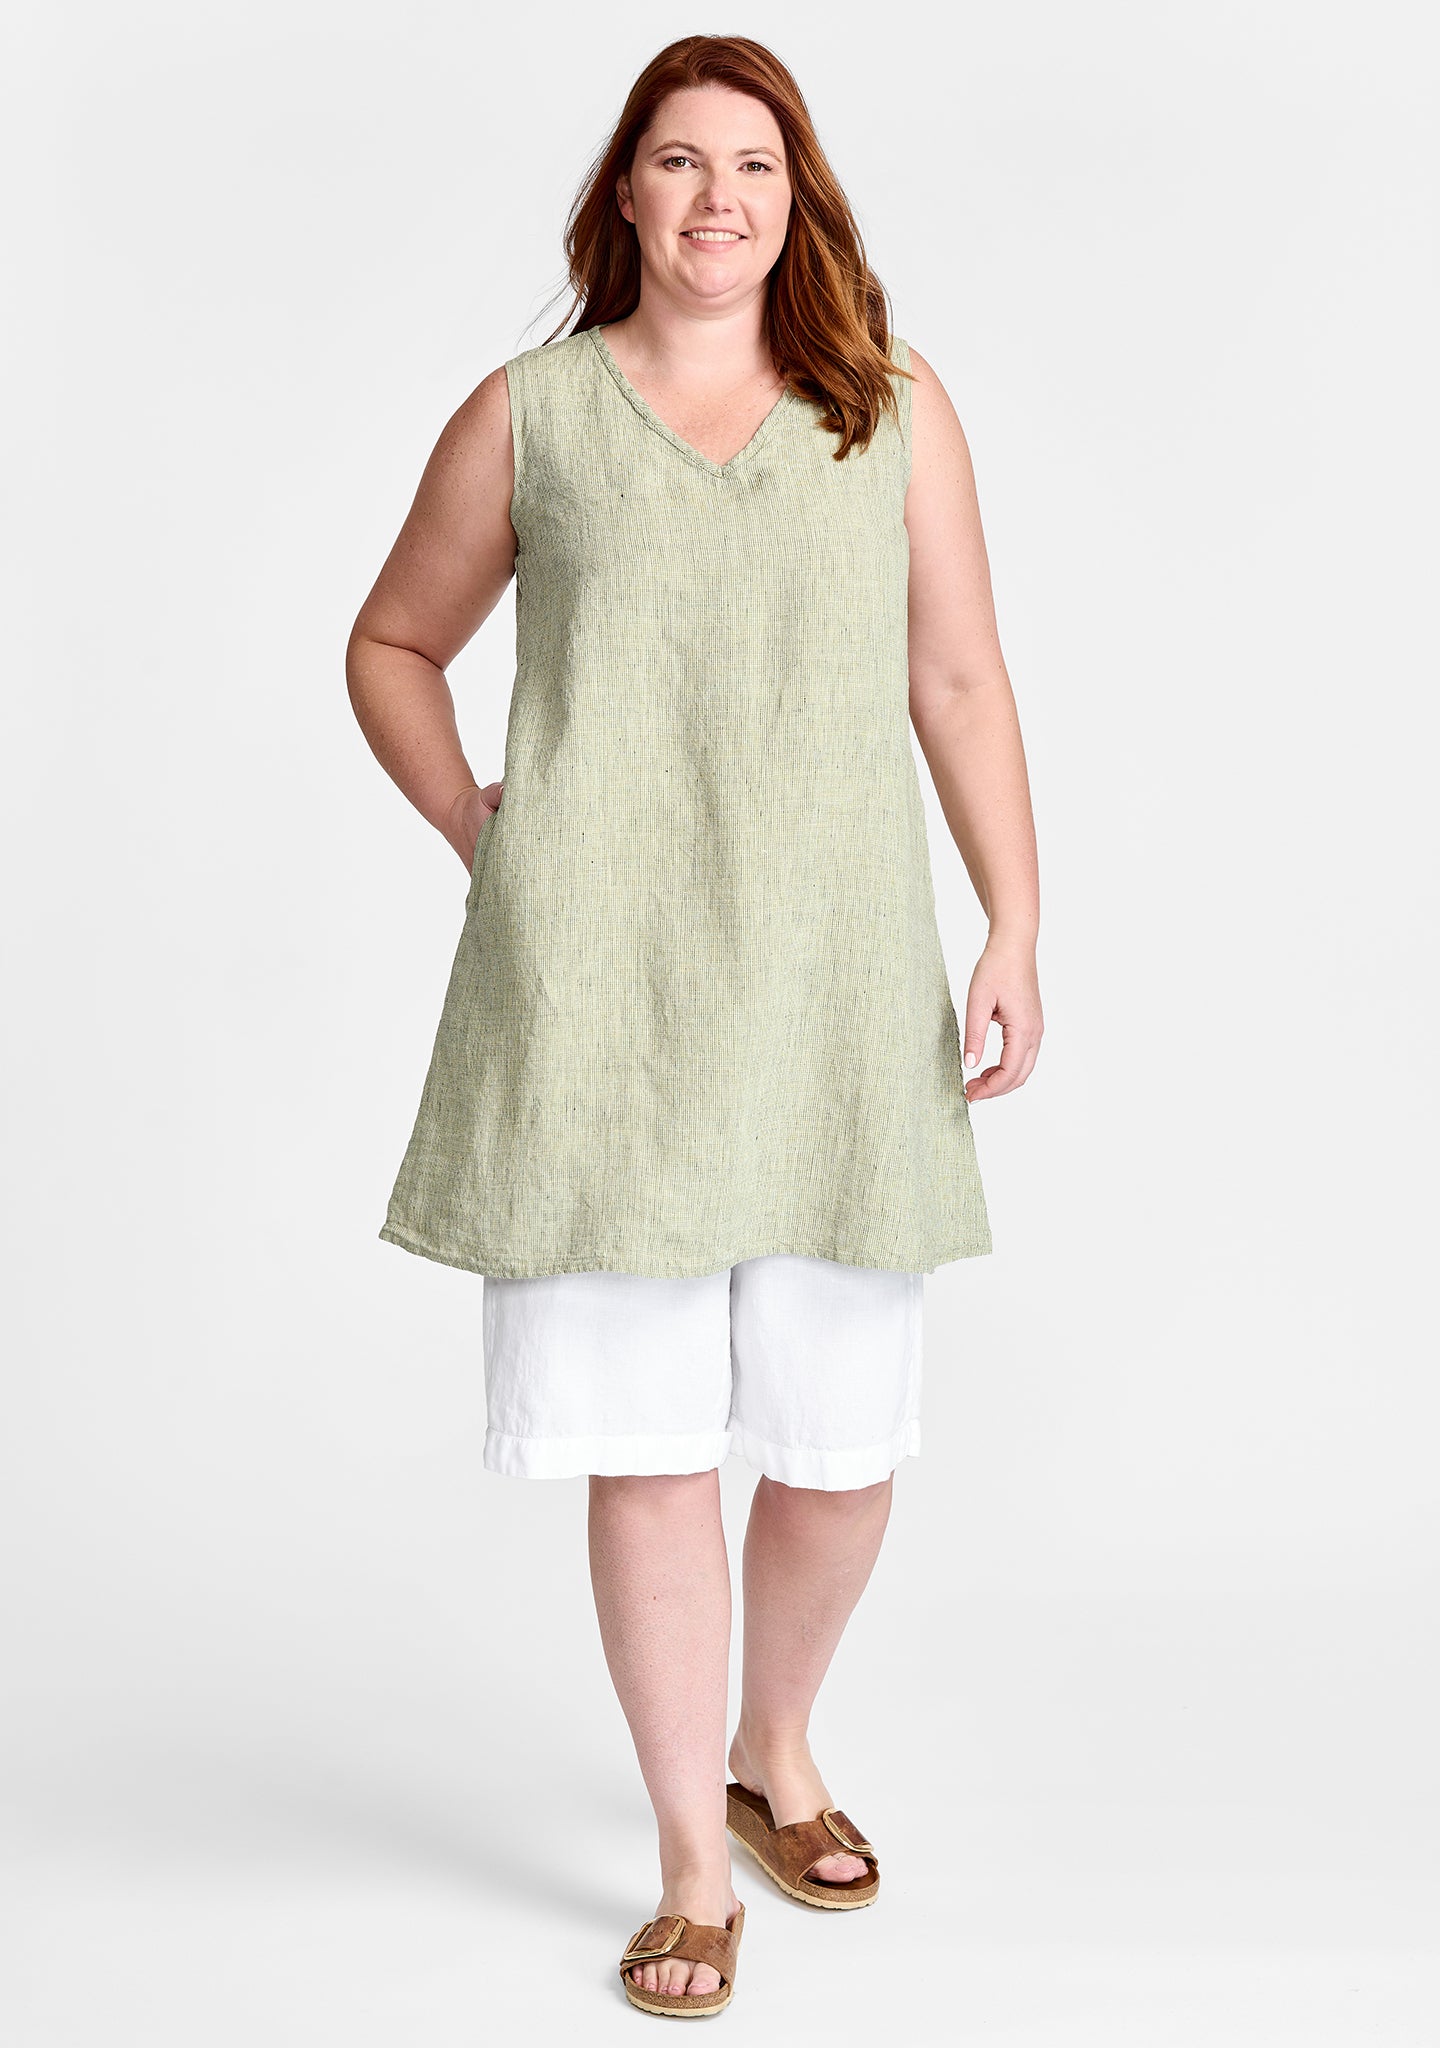 FLAX linen tunic in green with linen shorts in white